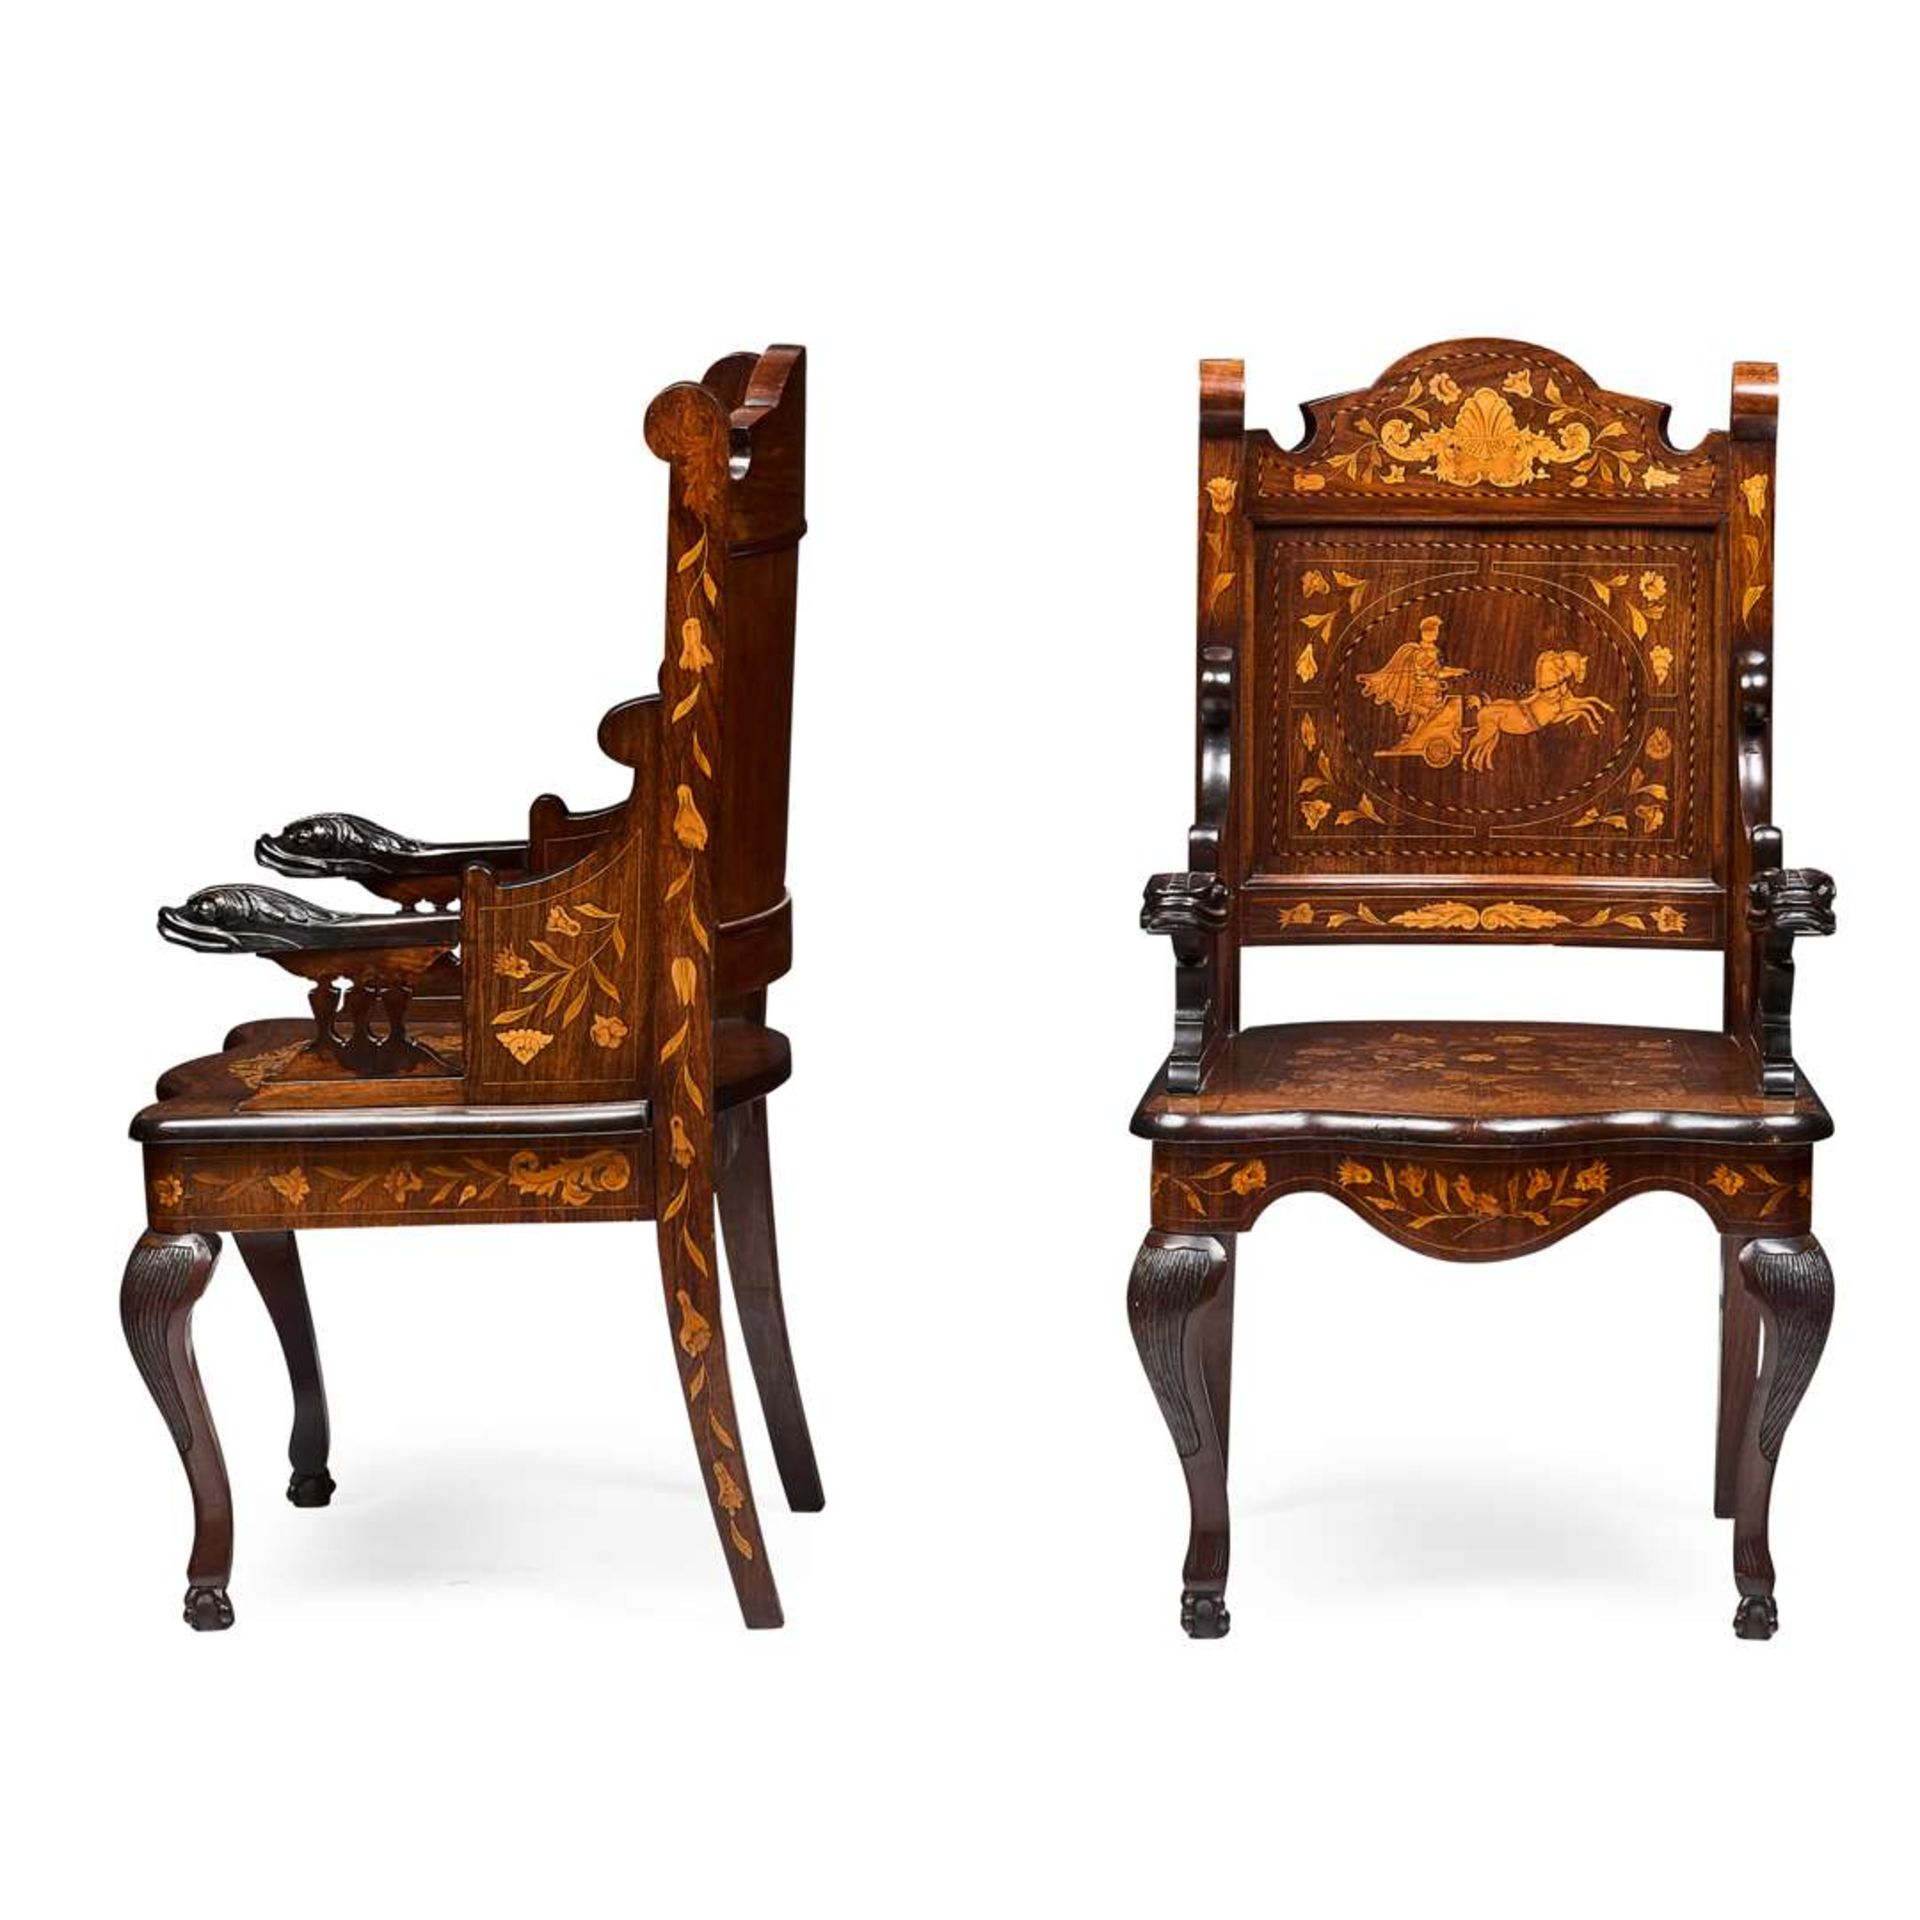 PAIR OF DUTCH WALNUT AND MARQUETRY ARMCHAIRS - Image 2 of 3